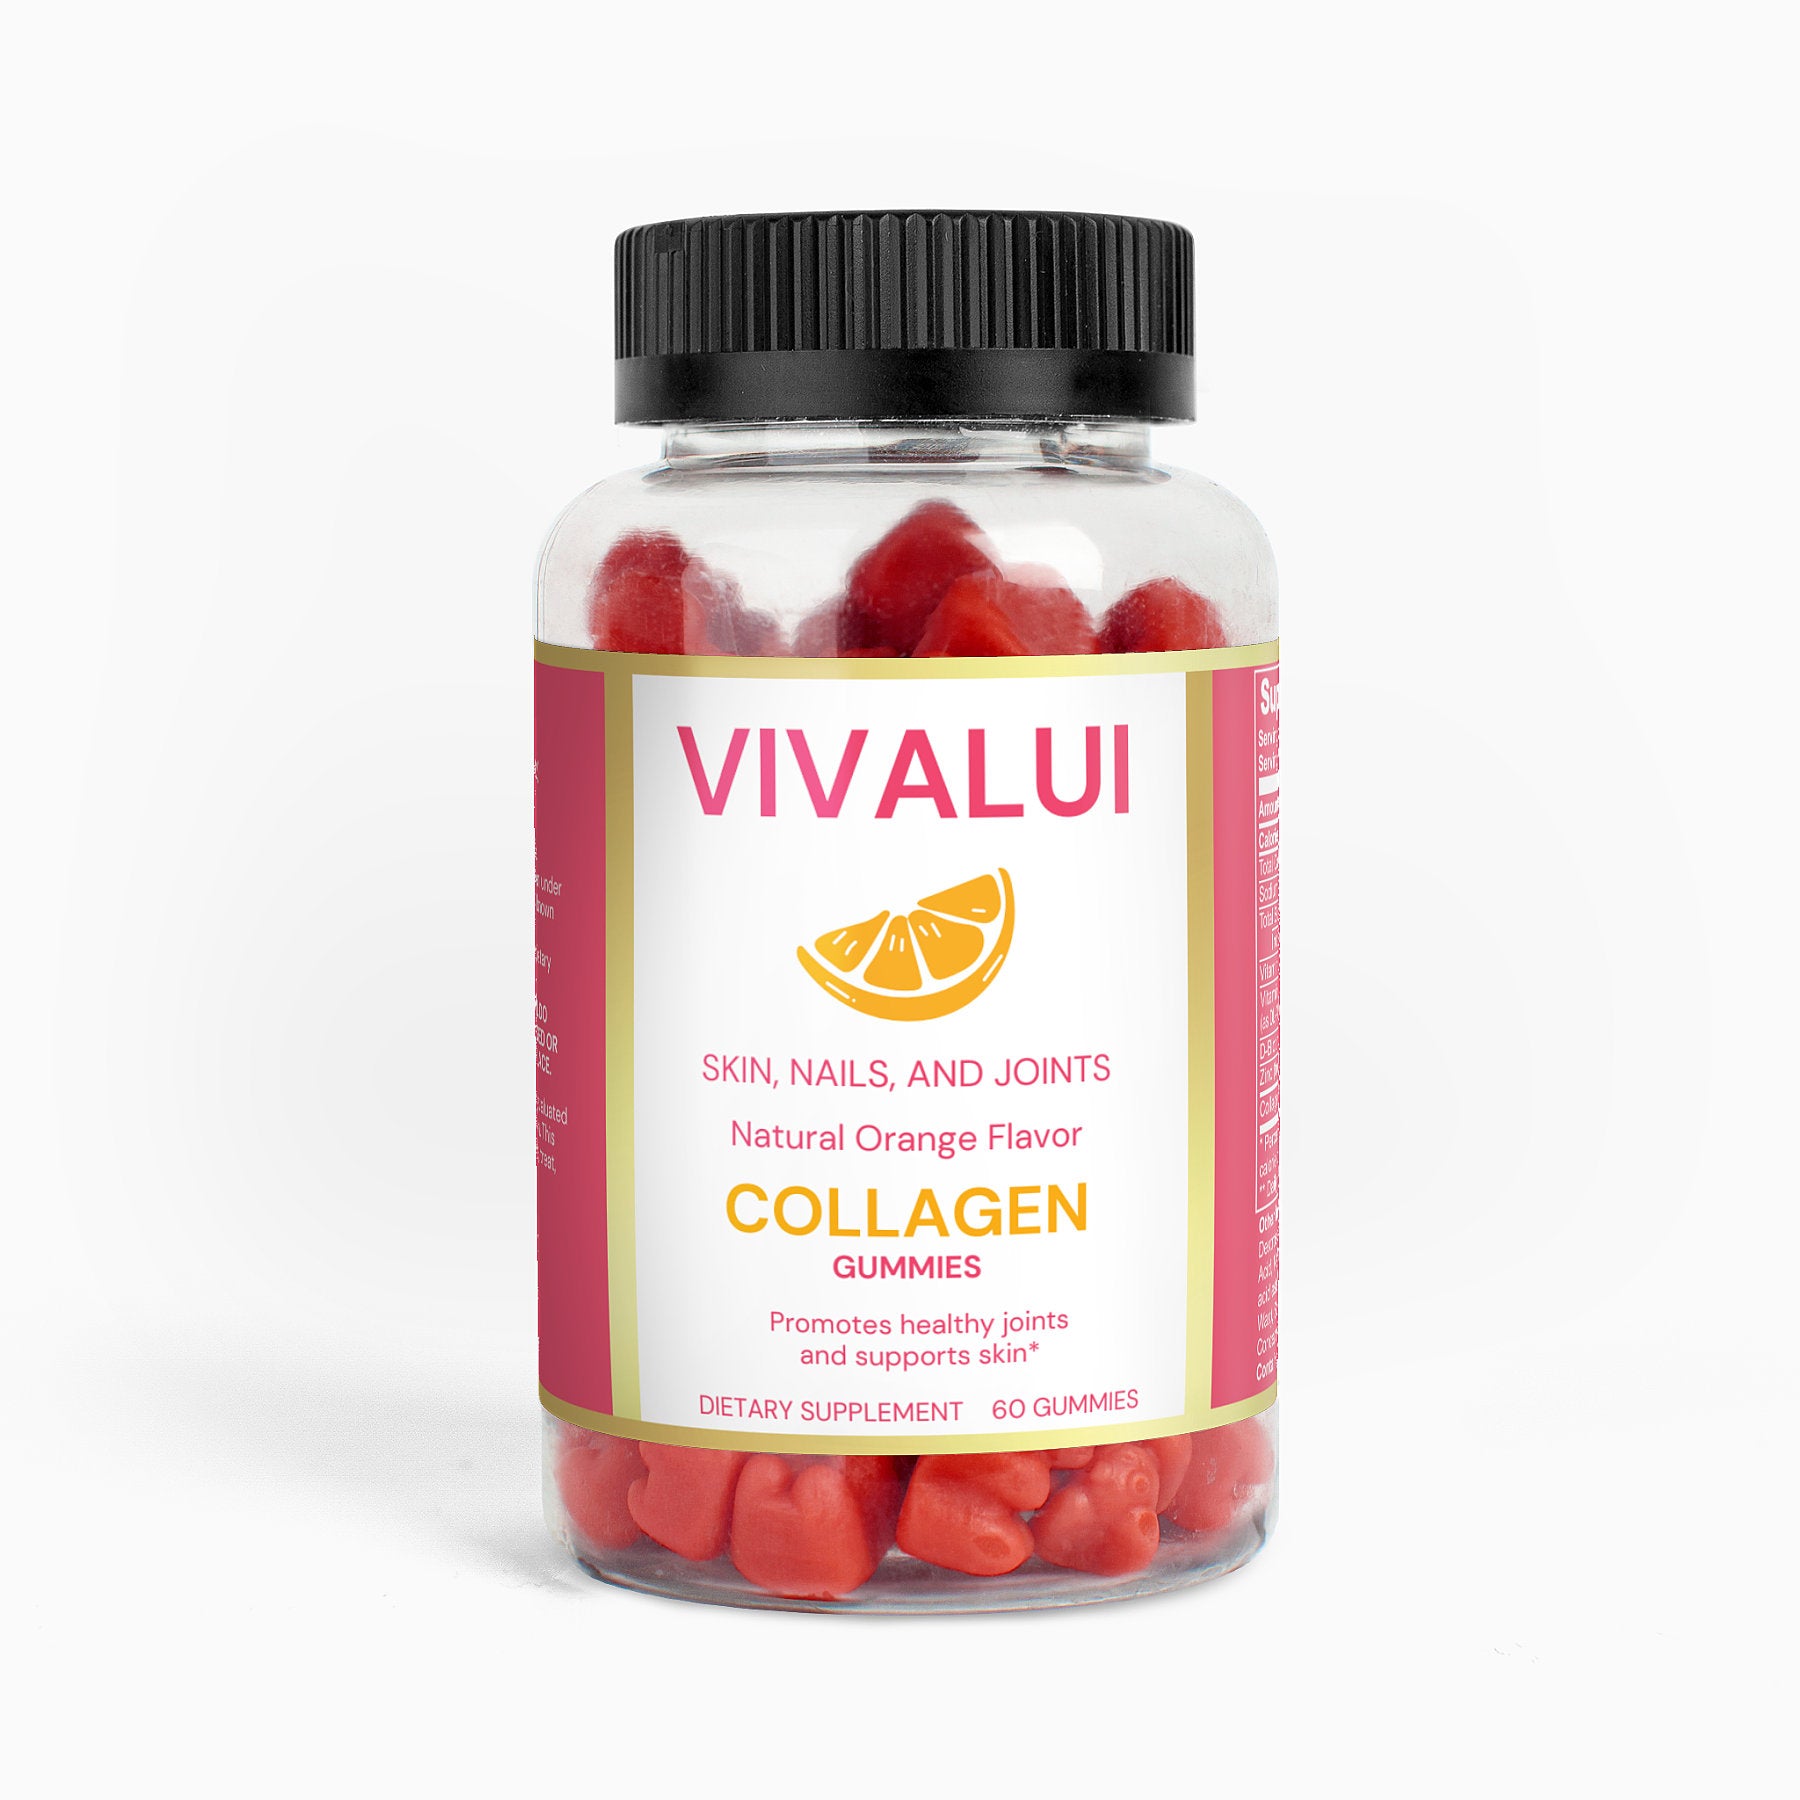 Adult Collagen Gummies for Skin, Hair, Nails and Immunity Boost